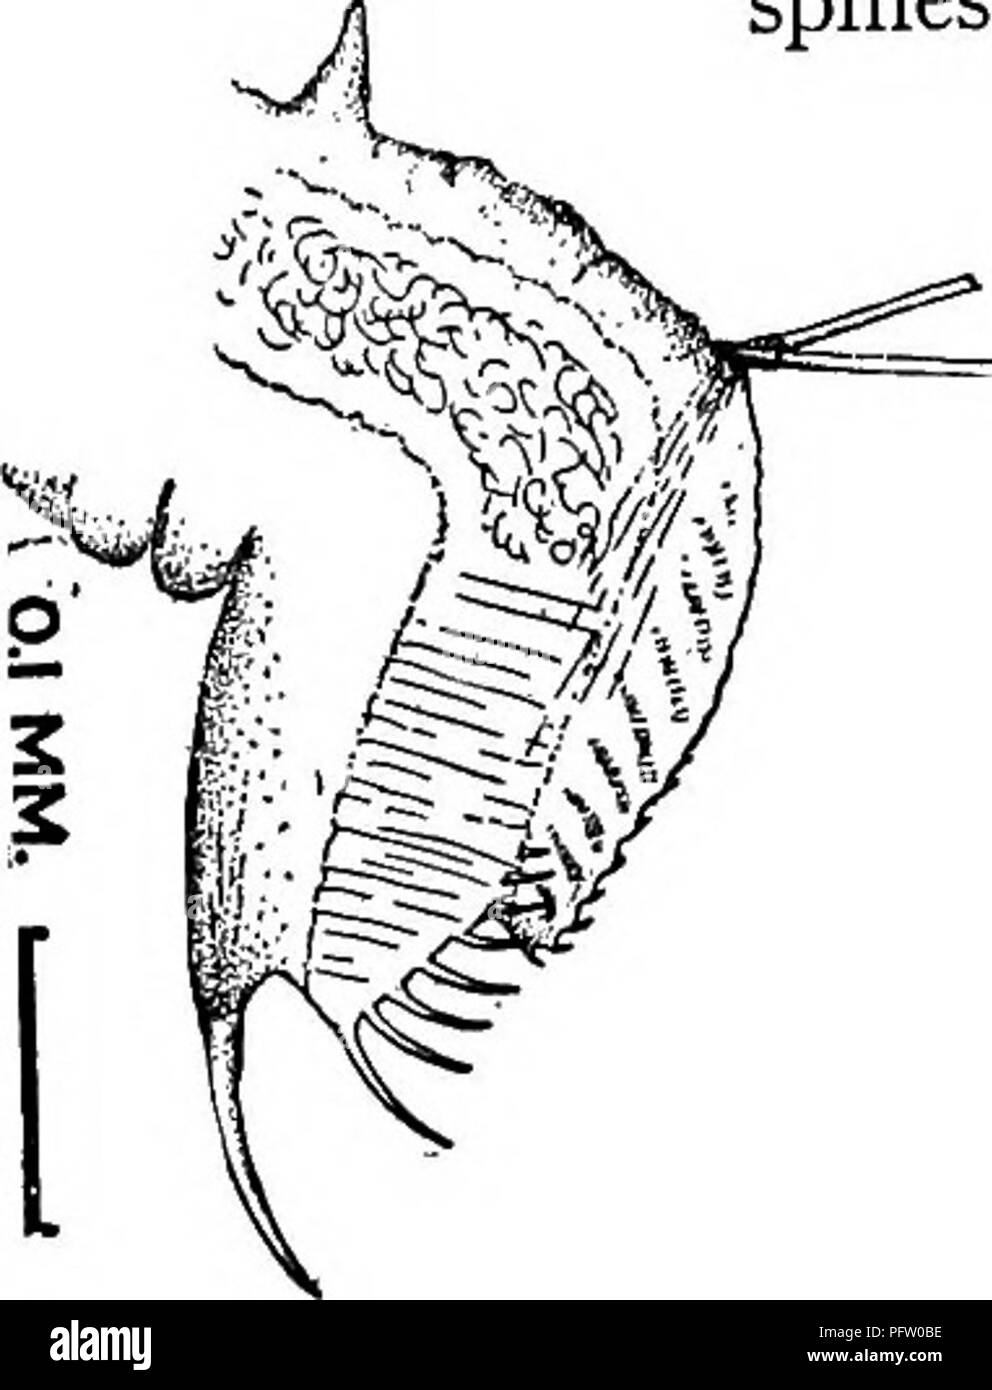 . Fresh-water biology. Freshwater biology. Fig. 1080. Ceriodaphnia acanthina. FiG. 1081. Details of valve, much enlarged. 55 (54) Valves not spinulated 56 56 (s7, 62) Post-abdomen abruptly cut into near apex, serrate above, spines below Ceriodaphnia megalops Sars 1861. Head angulated before antennules; valves striated. Anten- nules with sense-hair near apex. Post-abdomen broad, with an angle near apex, cut into below angle, finely serrate above and with 7-g slender anal spines below. Claws not pectinate. Length, 9, i.o-i.s mm.; J , 0.6-0.8 mm. Widely distributed but not common.. Fig. 1082. Cer Stock Photo